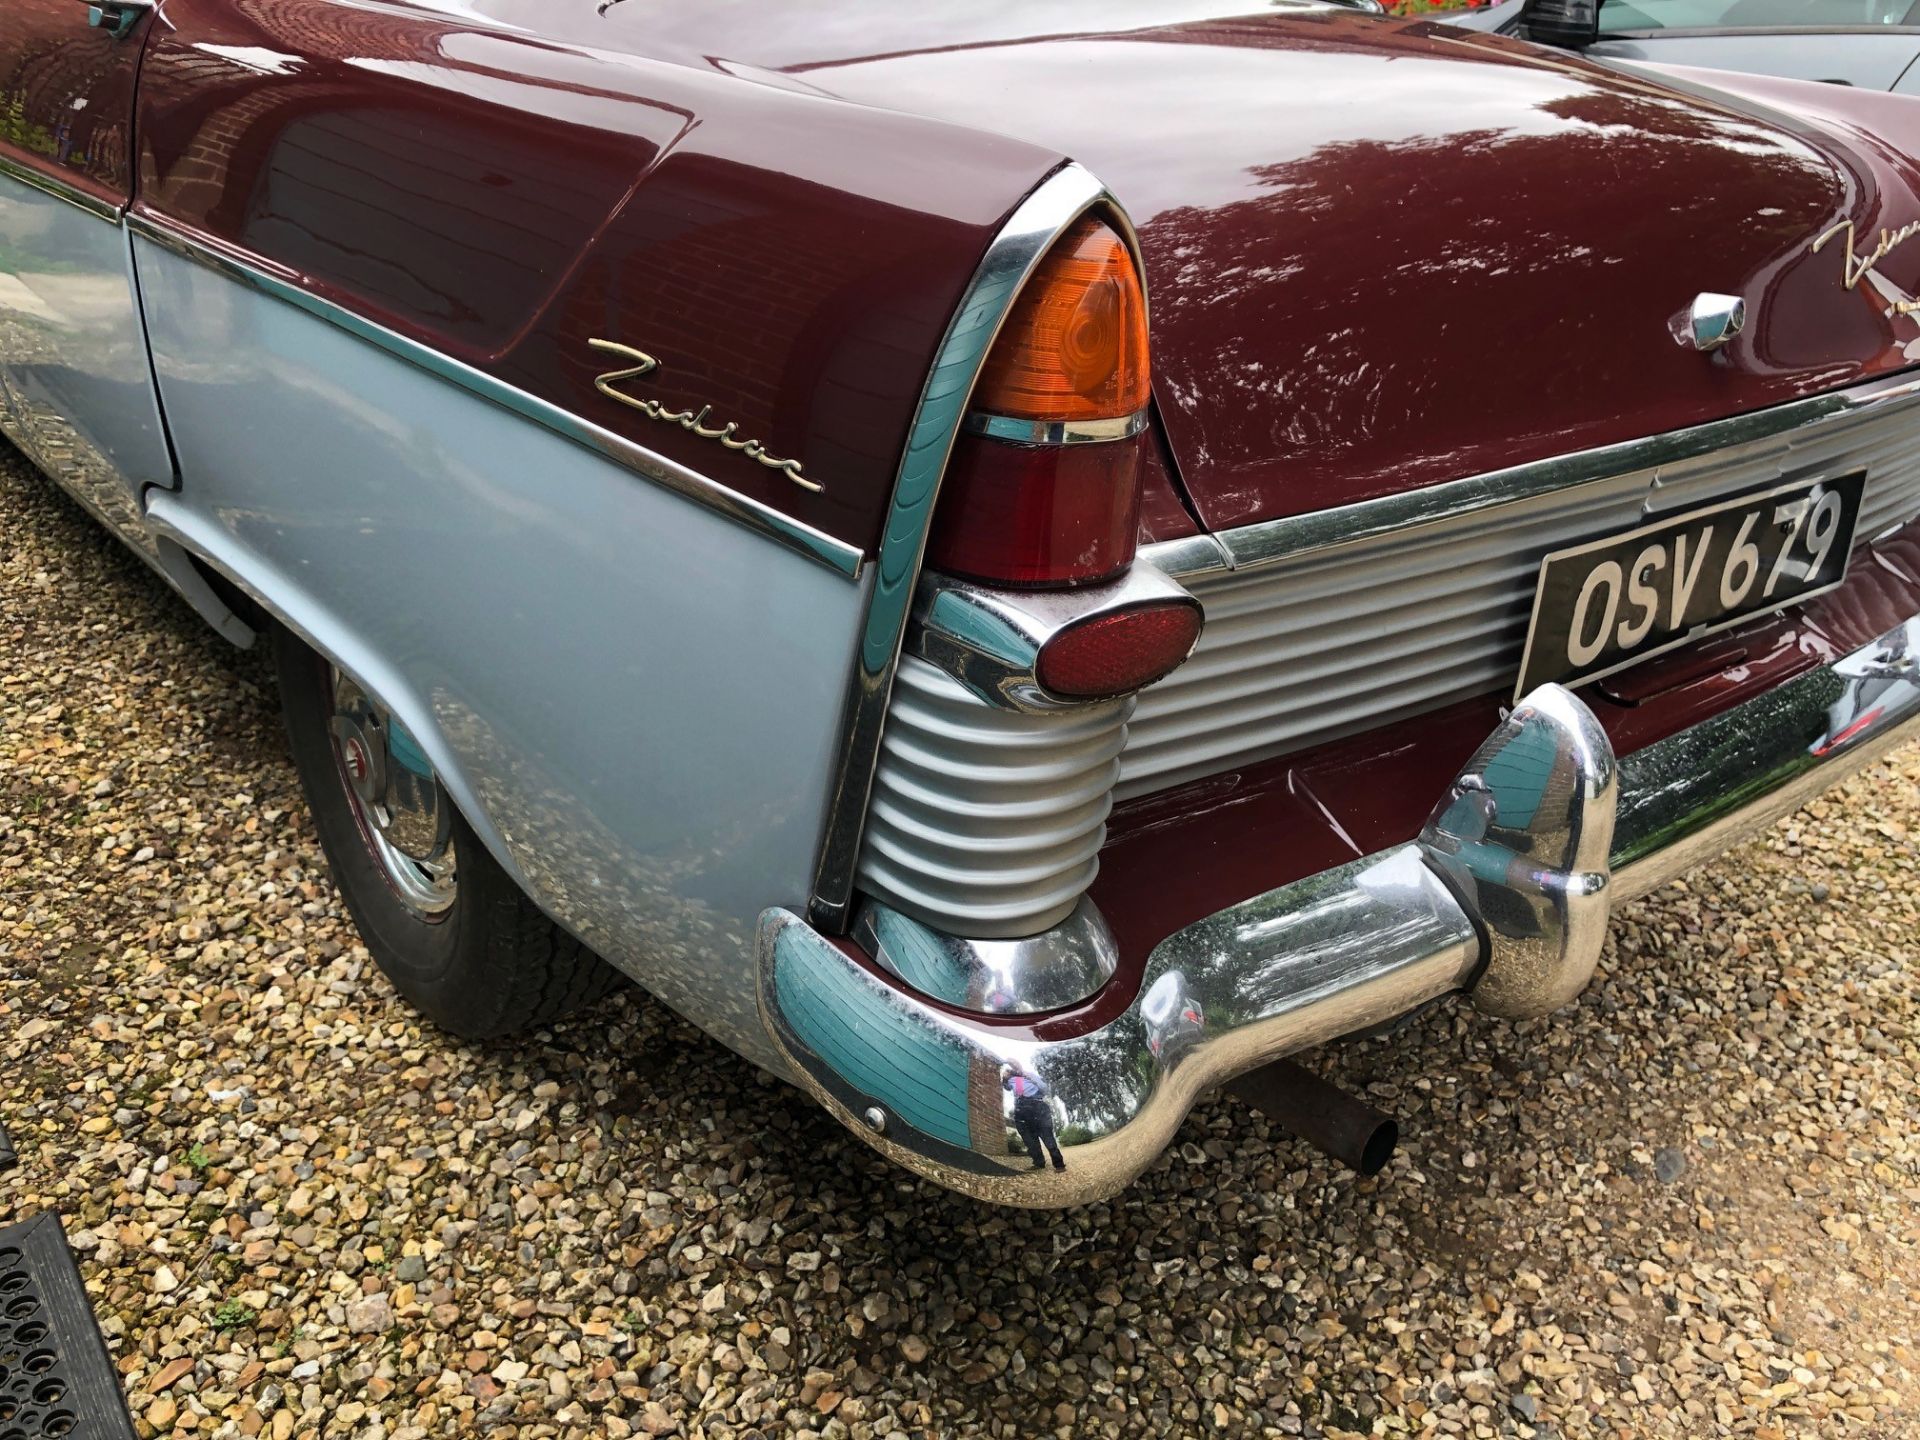 1960 Ford Zodiac Registration number OSV 679 Chassis number 206E306134 Maroon over grey Vinyl and - Image 30 of 70